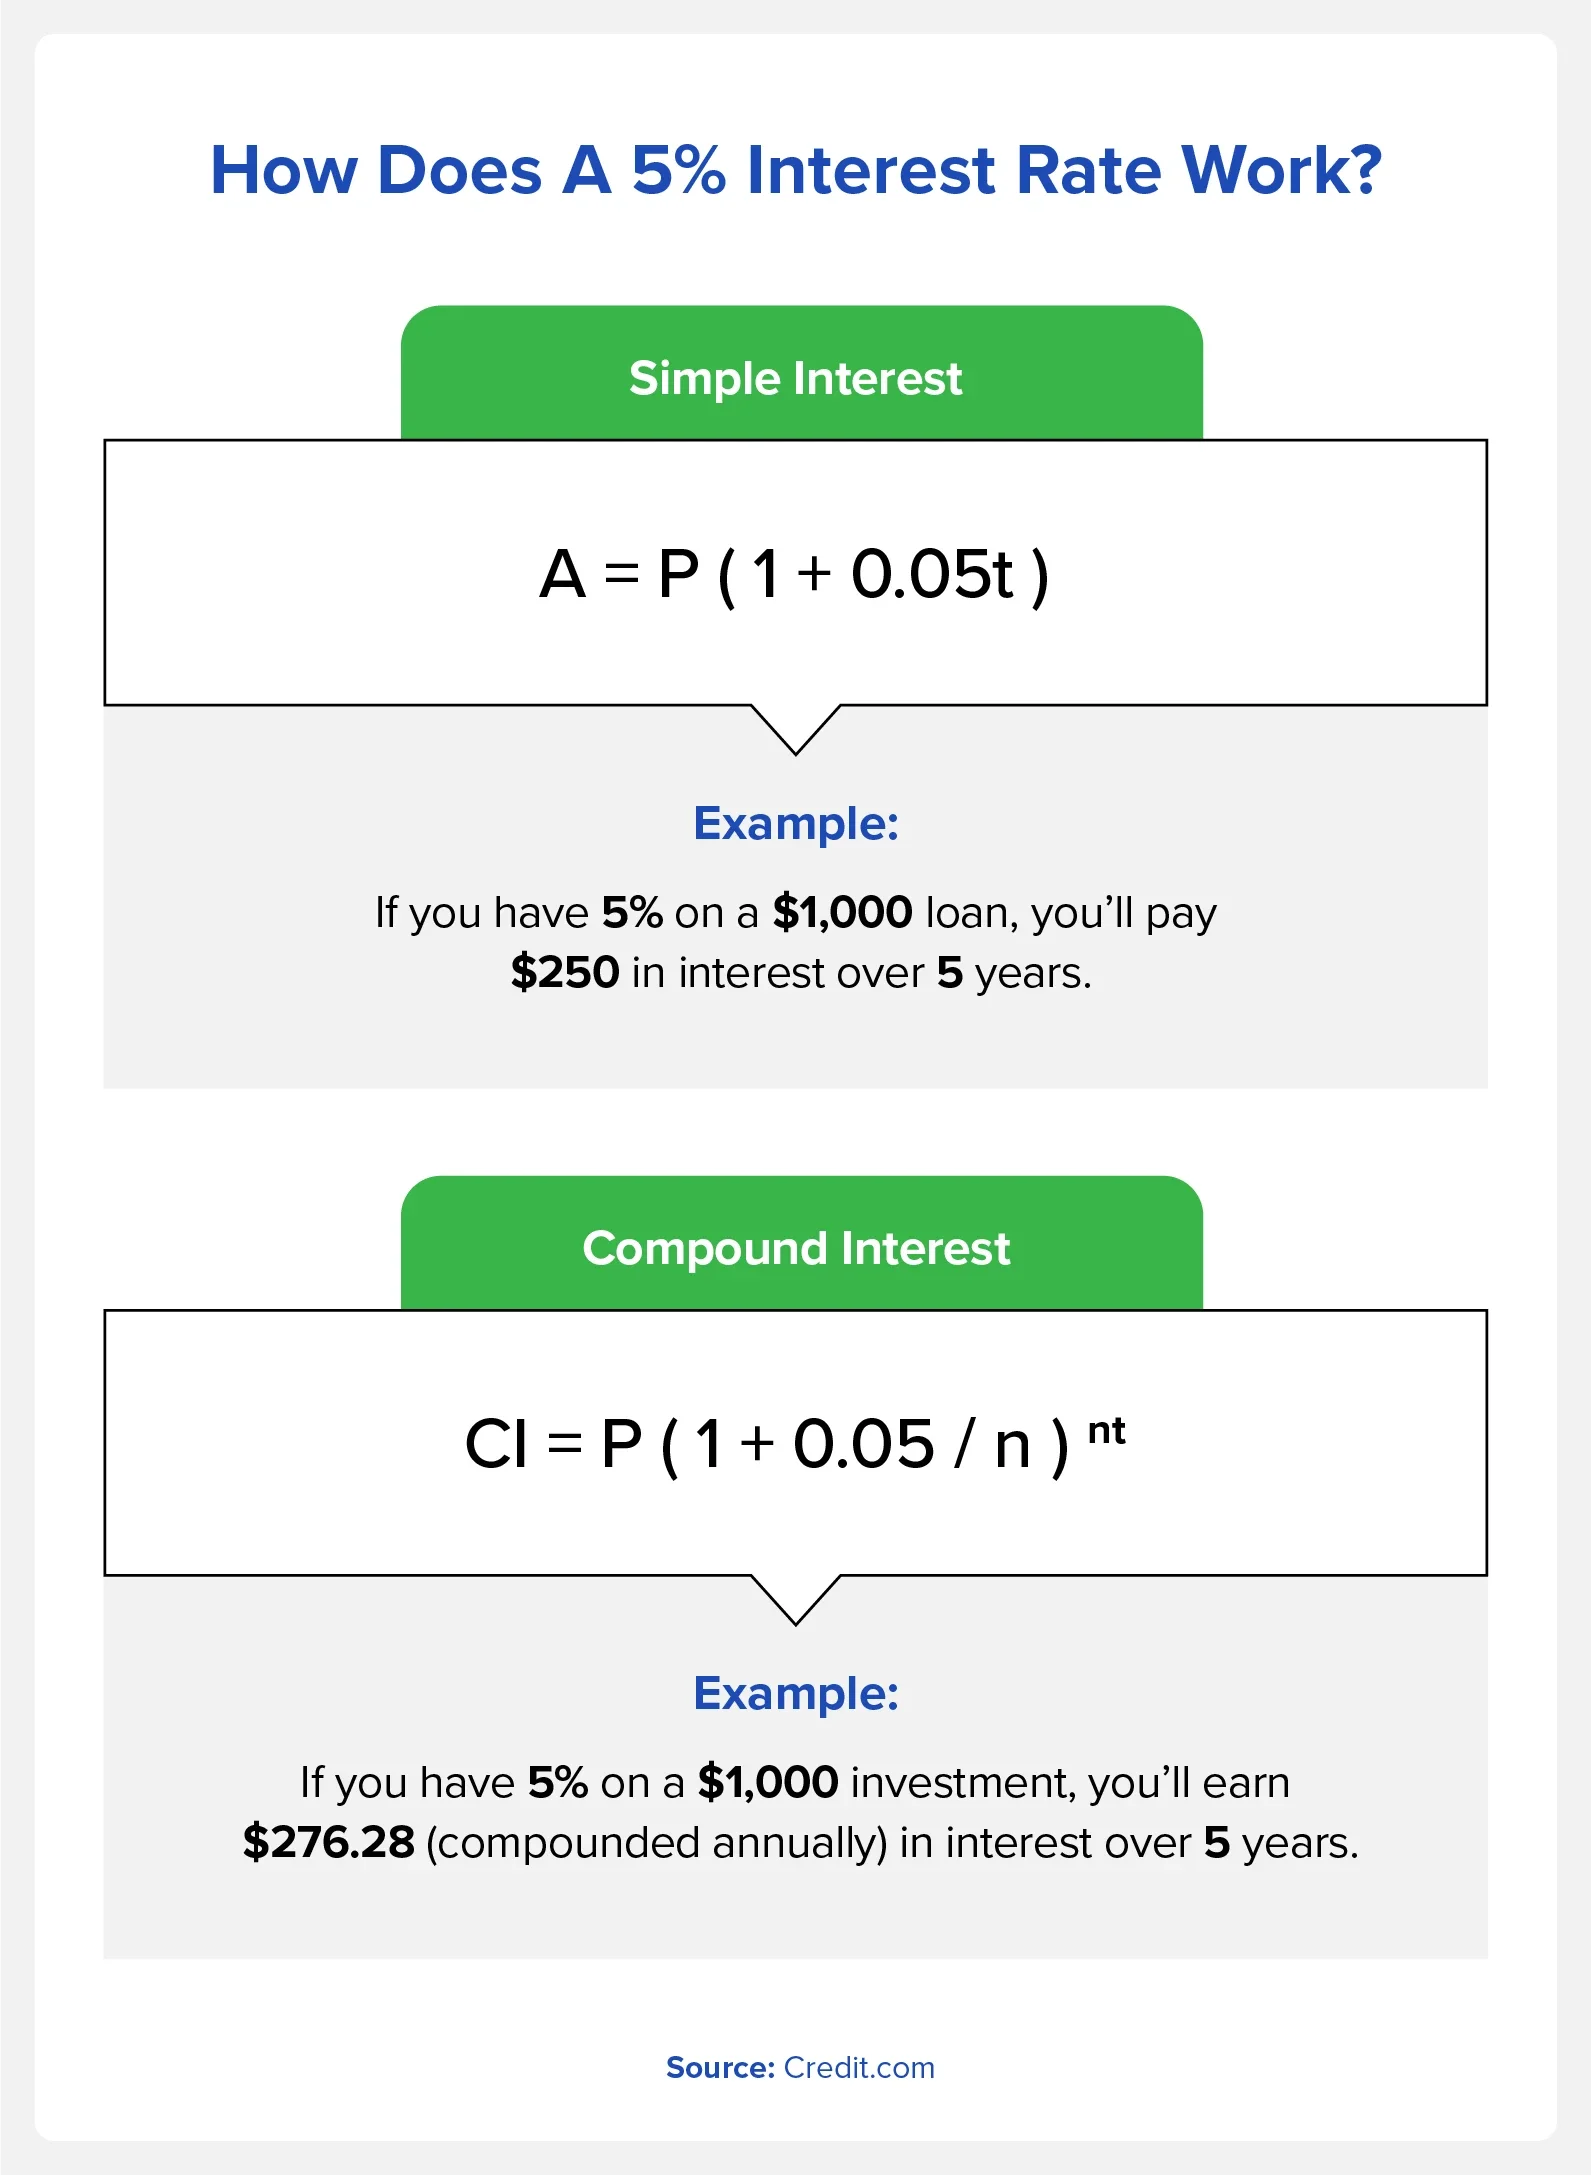 Graphic with formulas and examples of how a five percent interest rate works.